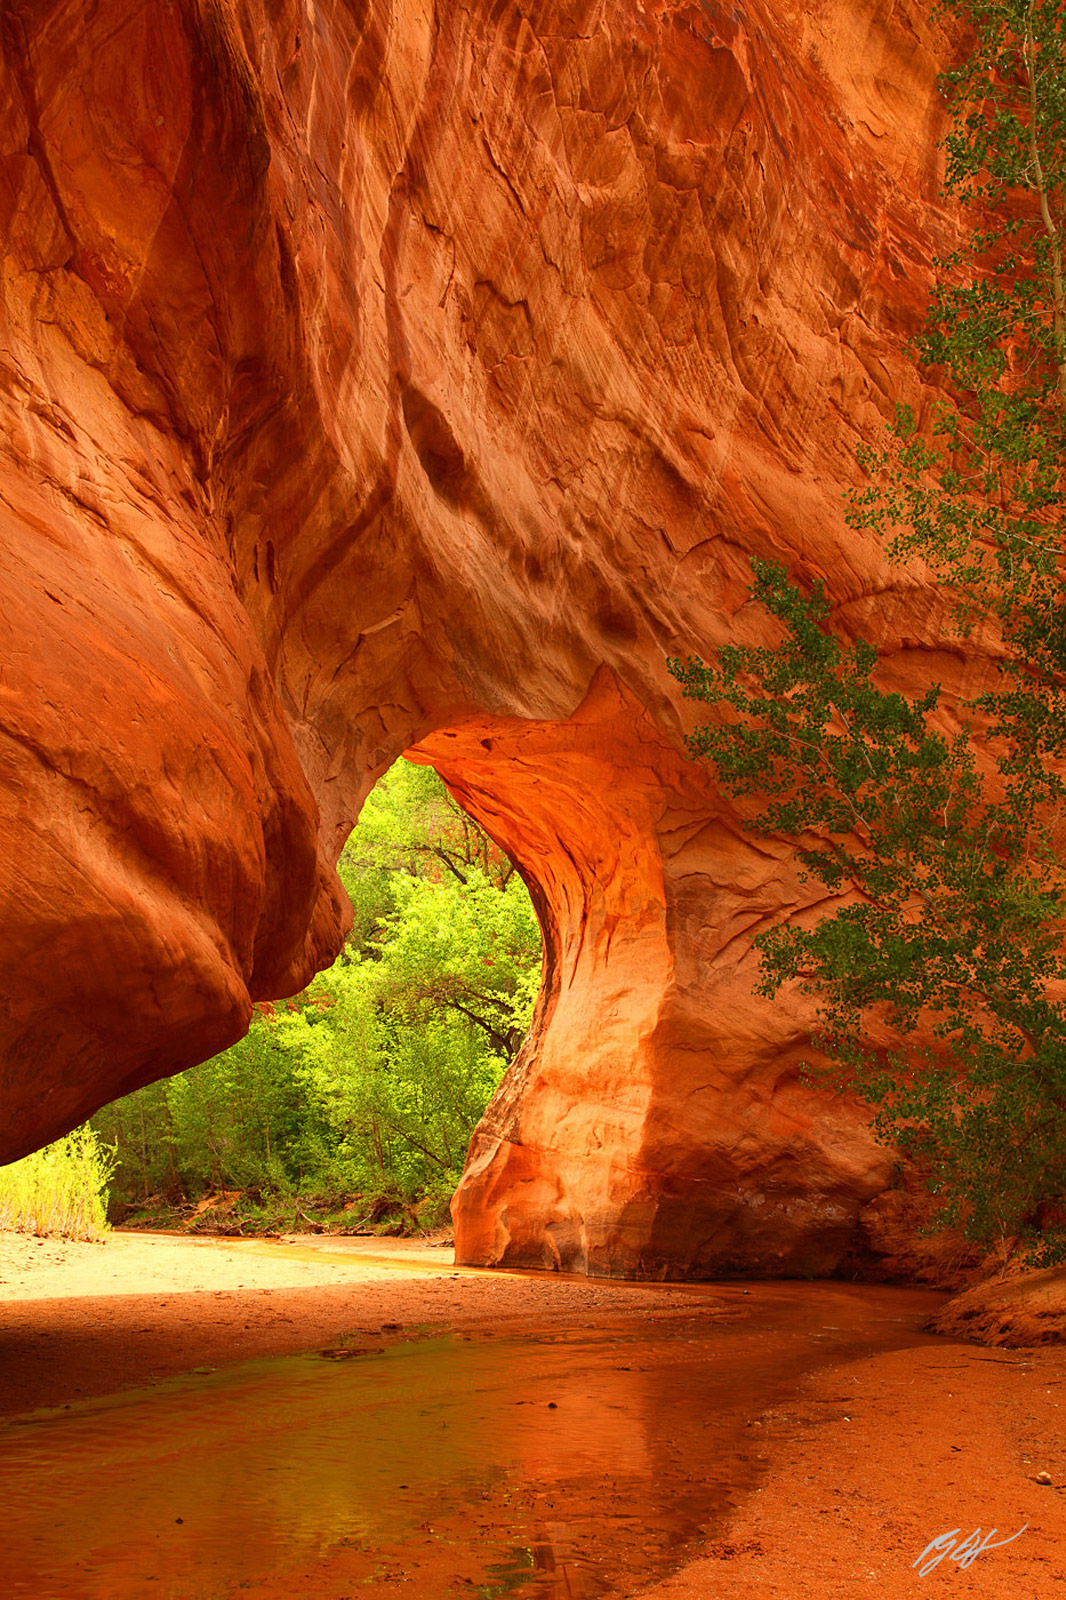 Coyote Natural Bridge in Coyote Gulch in the Grand Staircase-Escalante National Monument in Utah